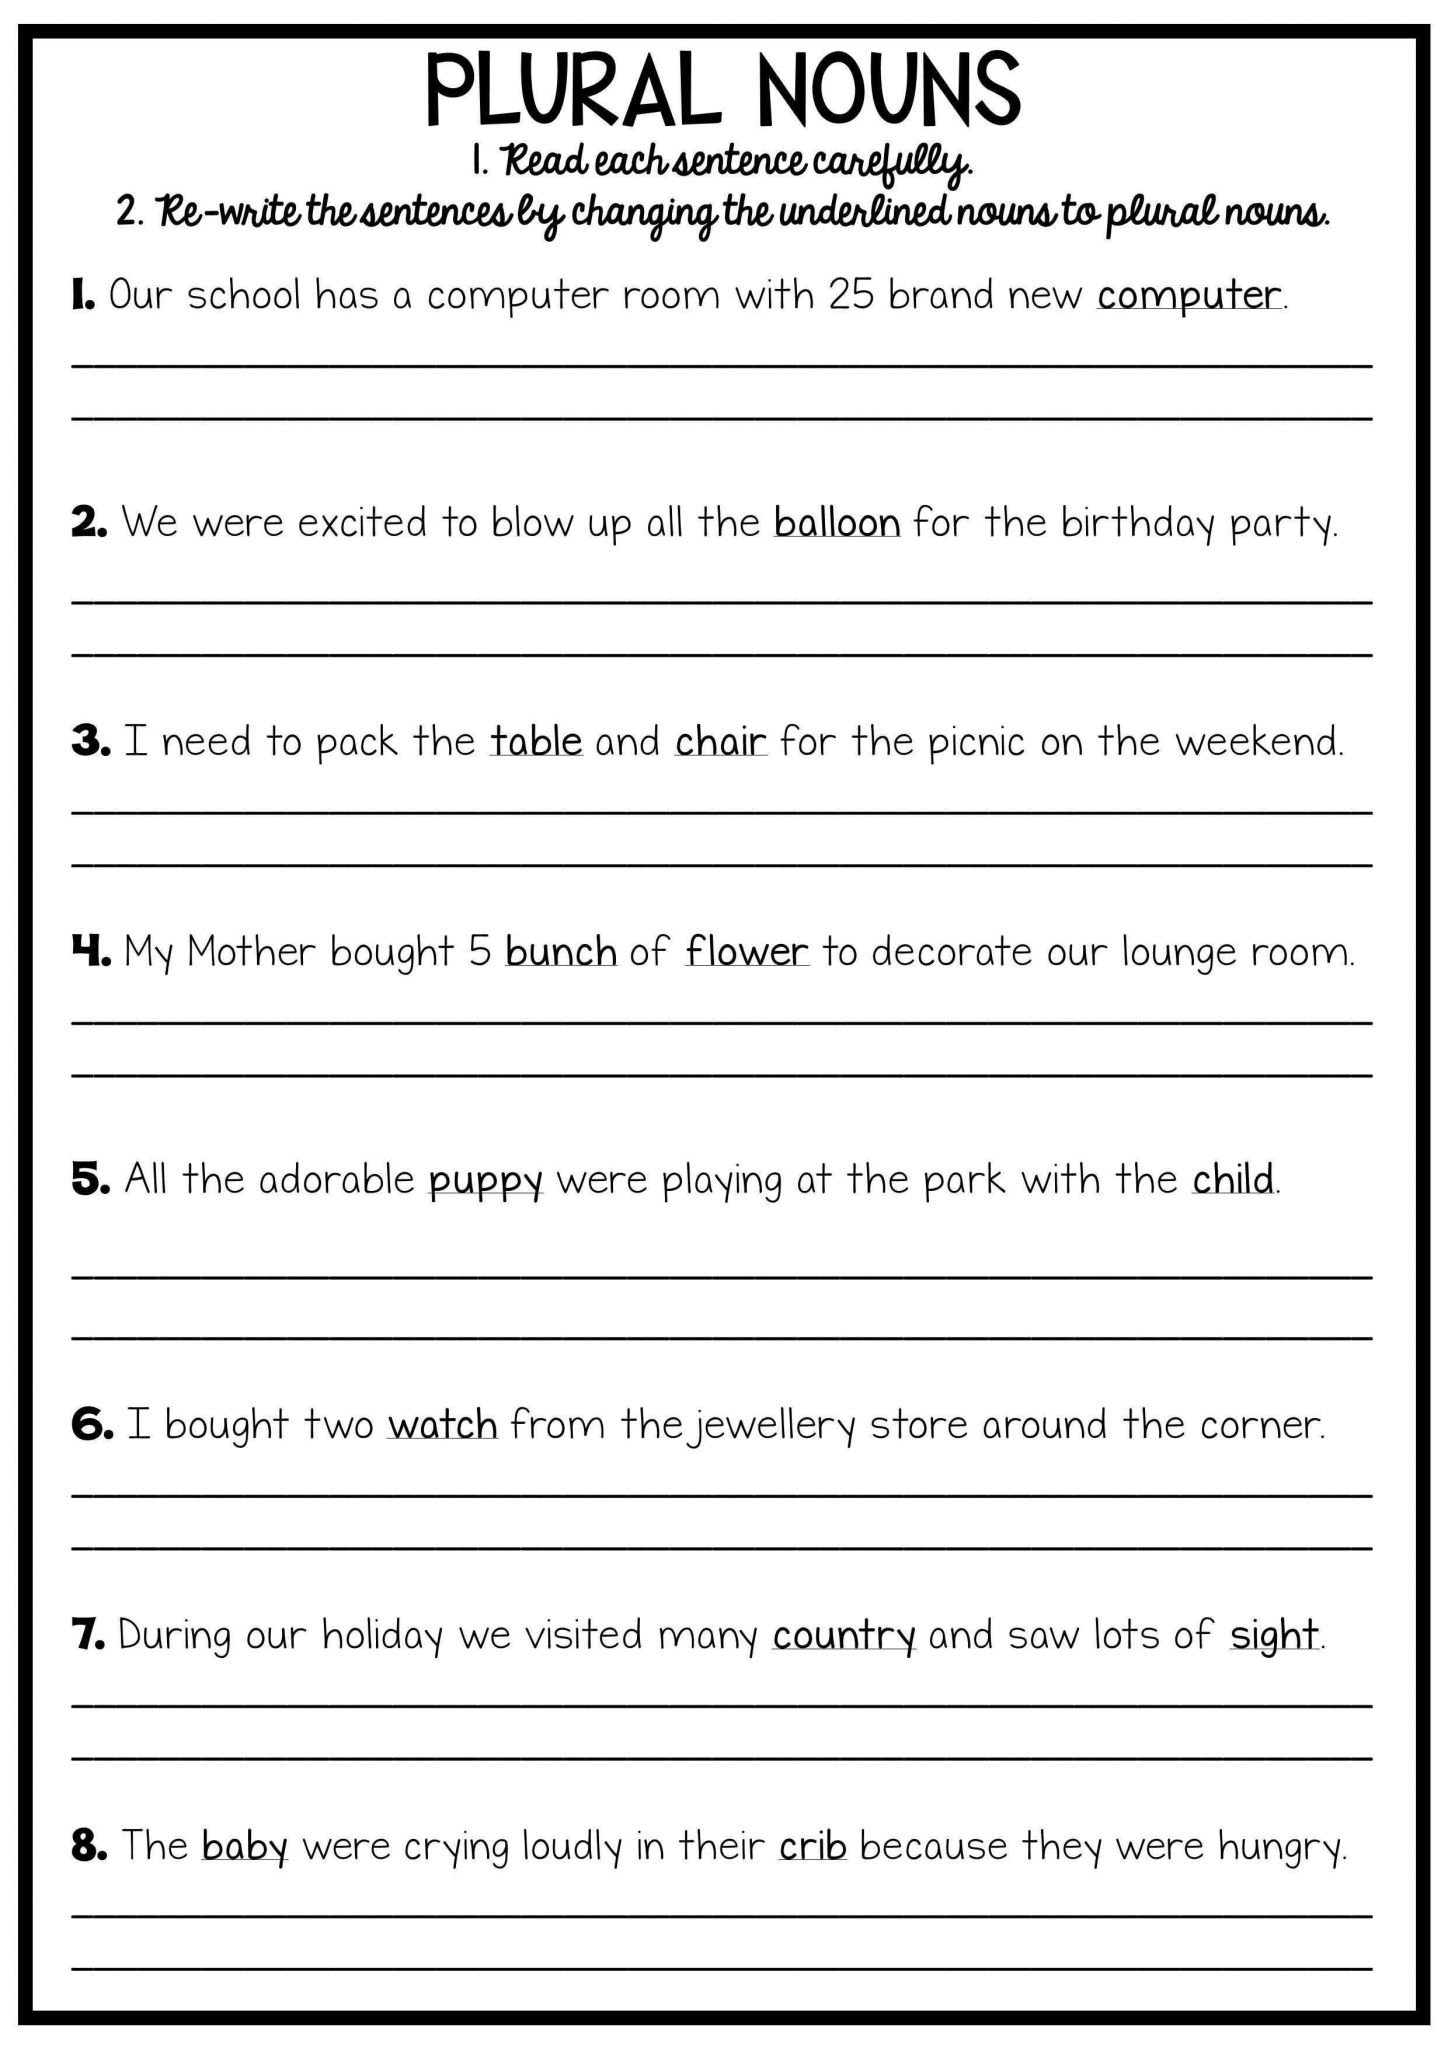 Second Grade Writing Activities Worksheets For Free Download  Math Pertaining To Second Grade Writing Activities Worksheets